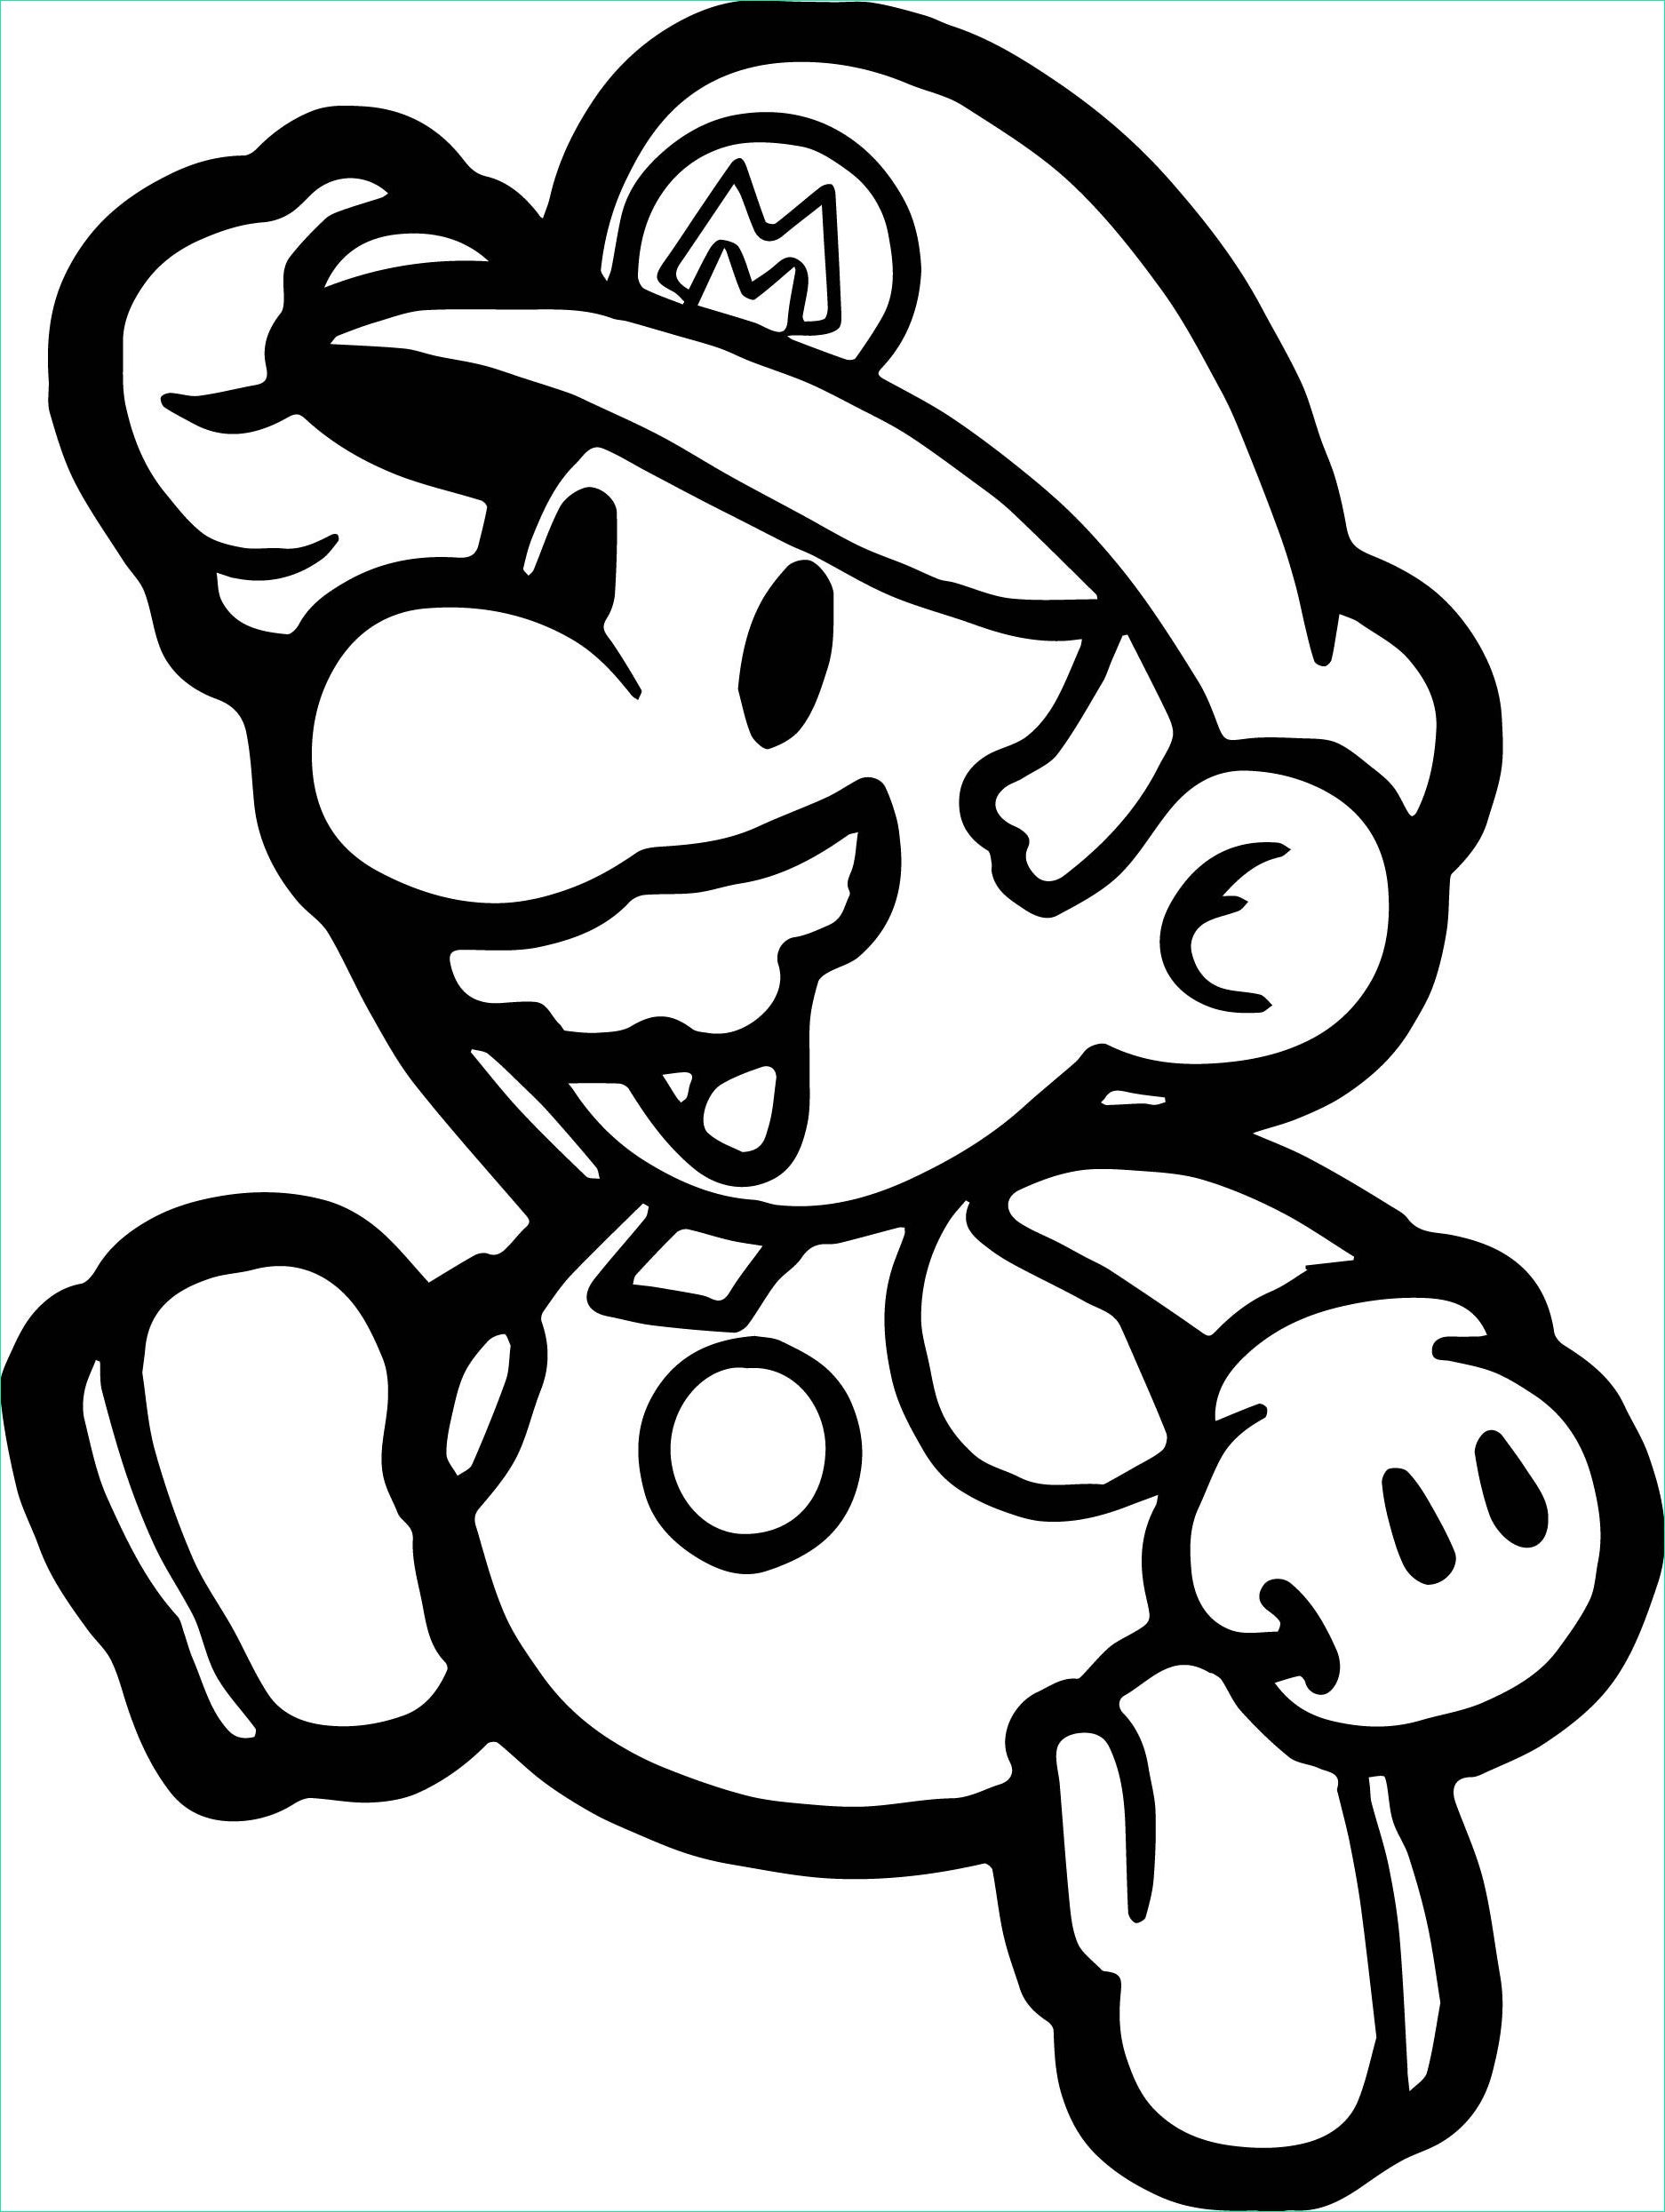 Coloriages Mario Unique Collection Super Paper Mario Coloring Pages at Getcolorings